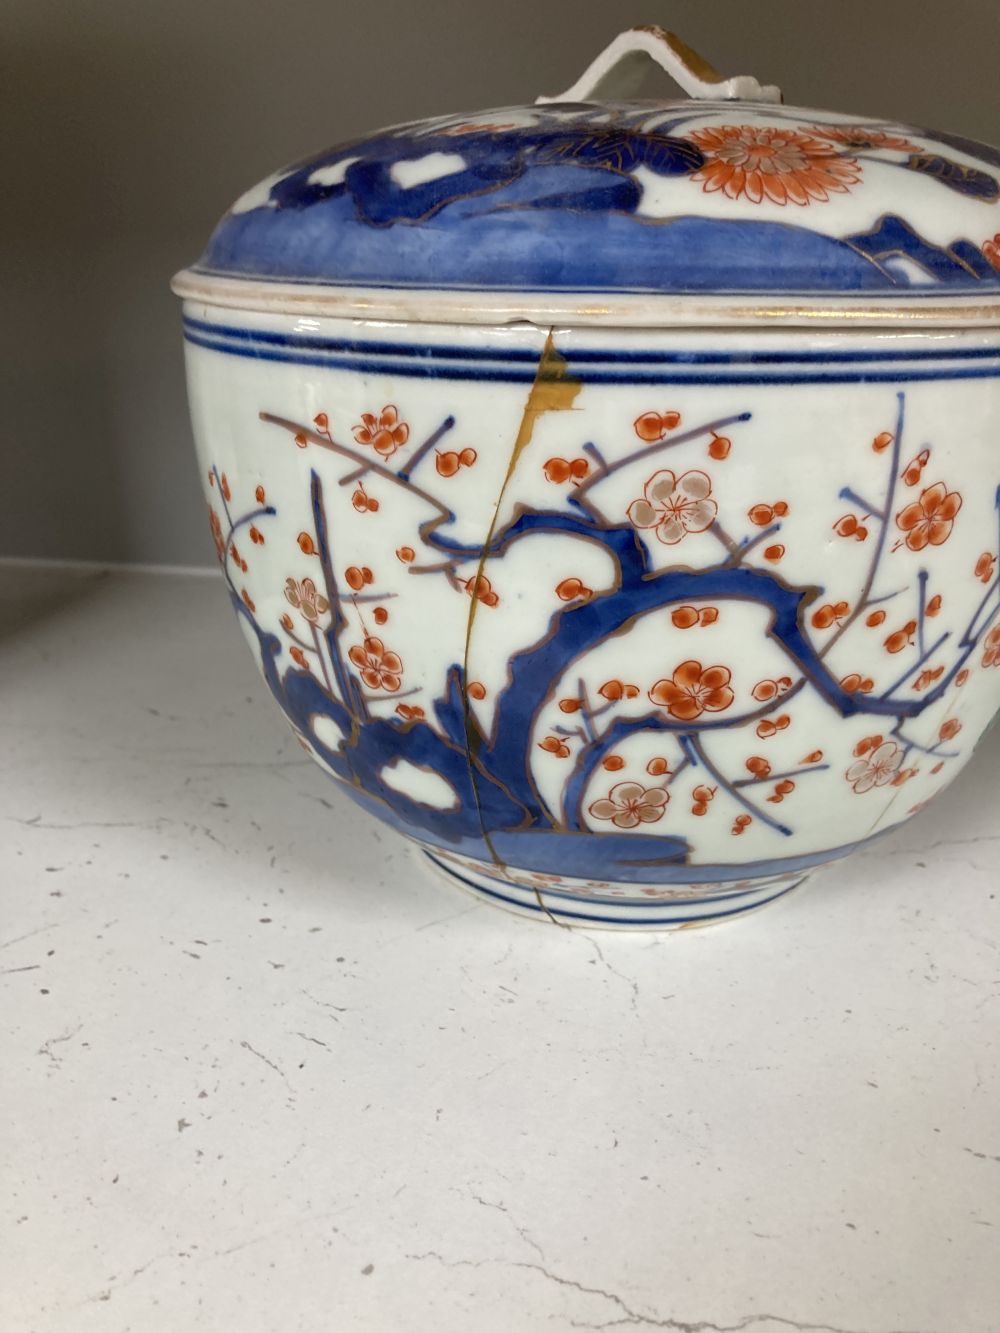 Two 19th century Chinese famille rose brushpots, and other Chinese and Japanese porcelain items, 18th-20th century